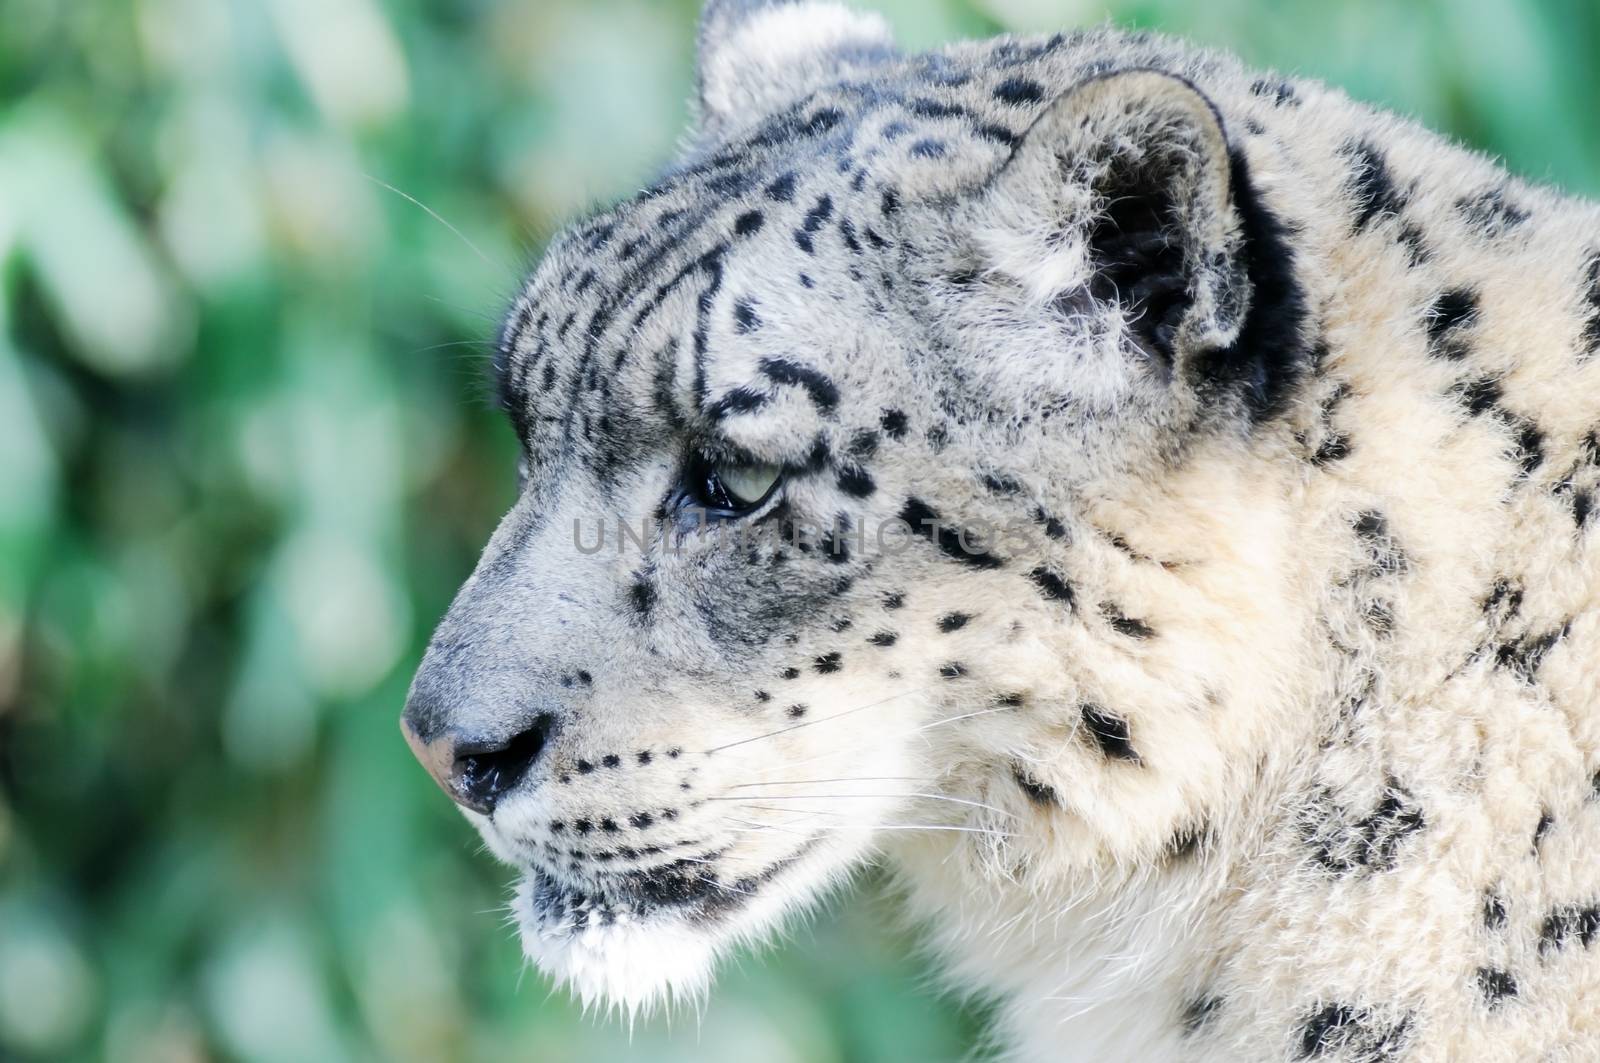 Snow leopard by kmwphotography